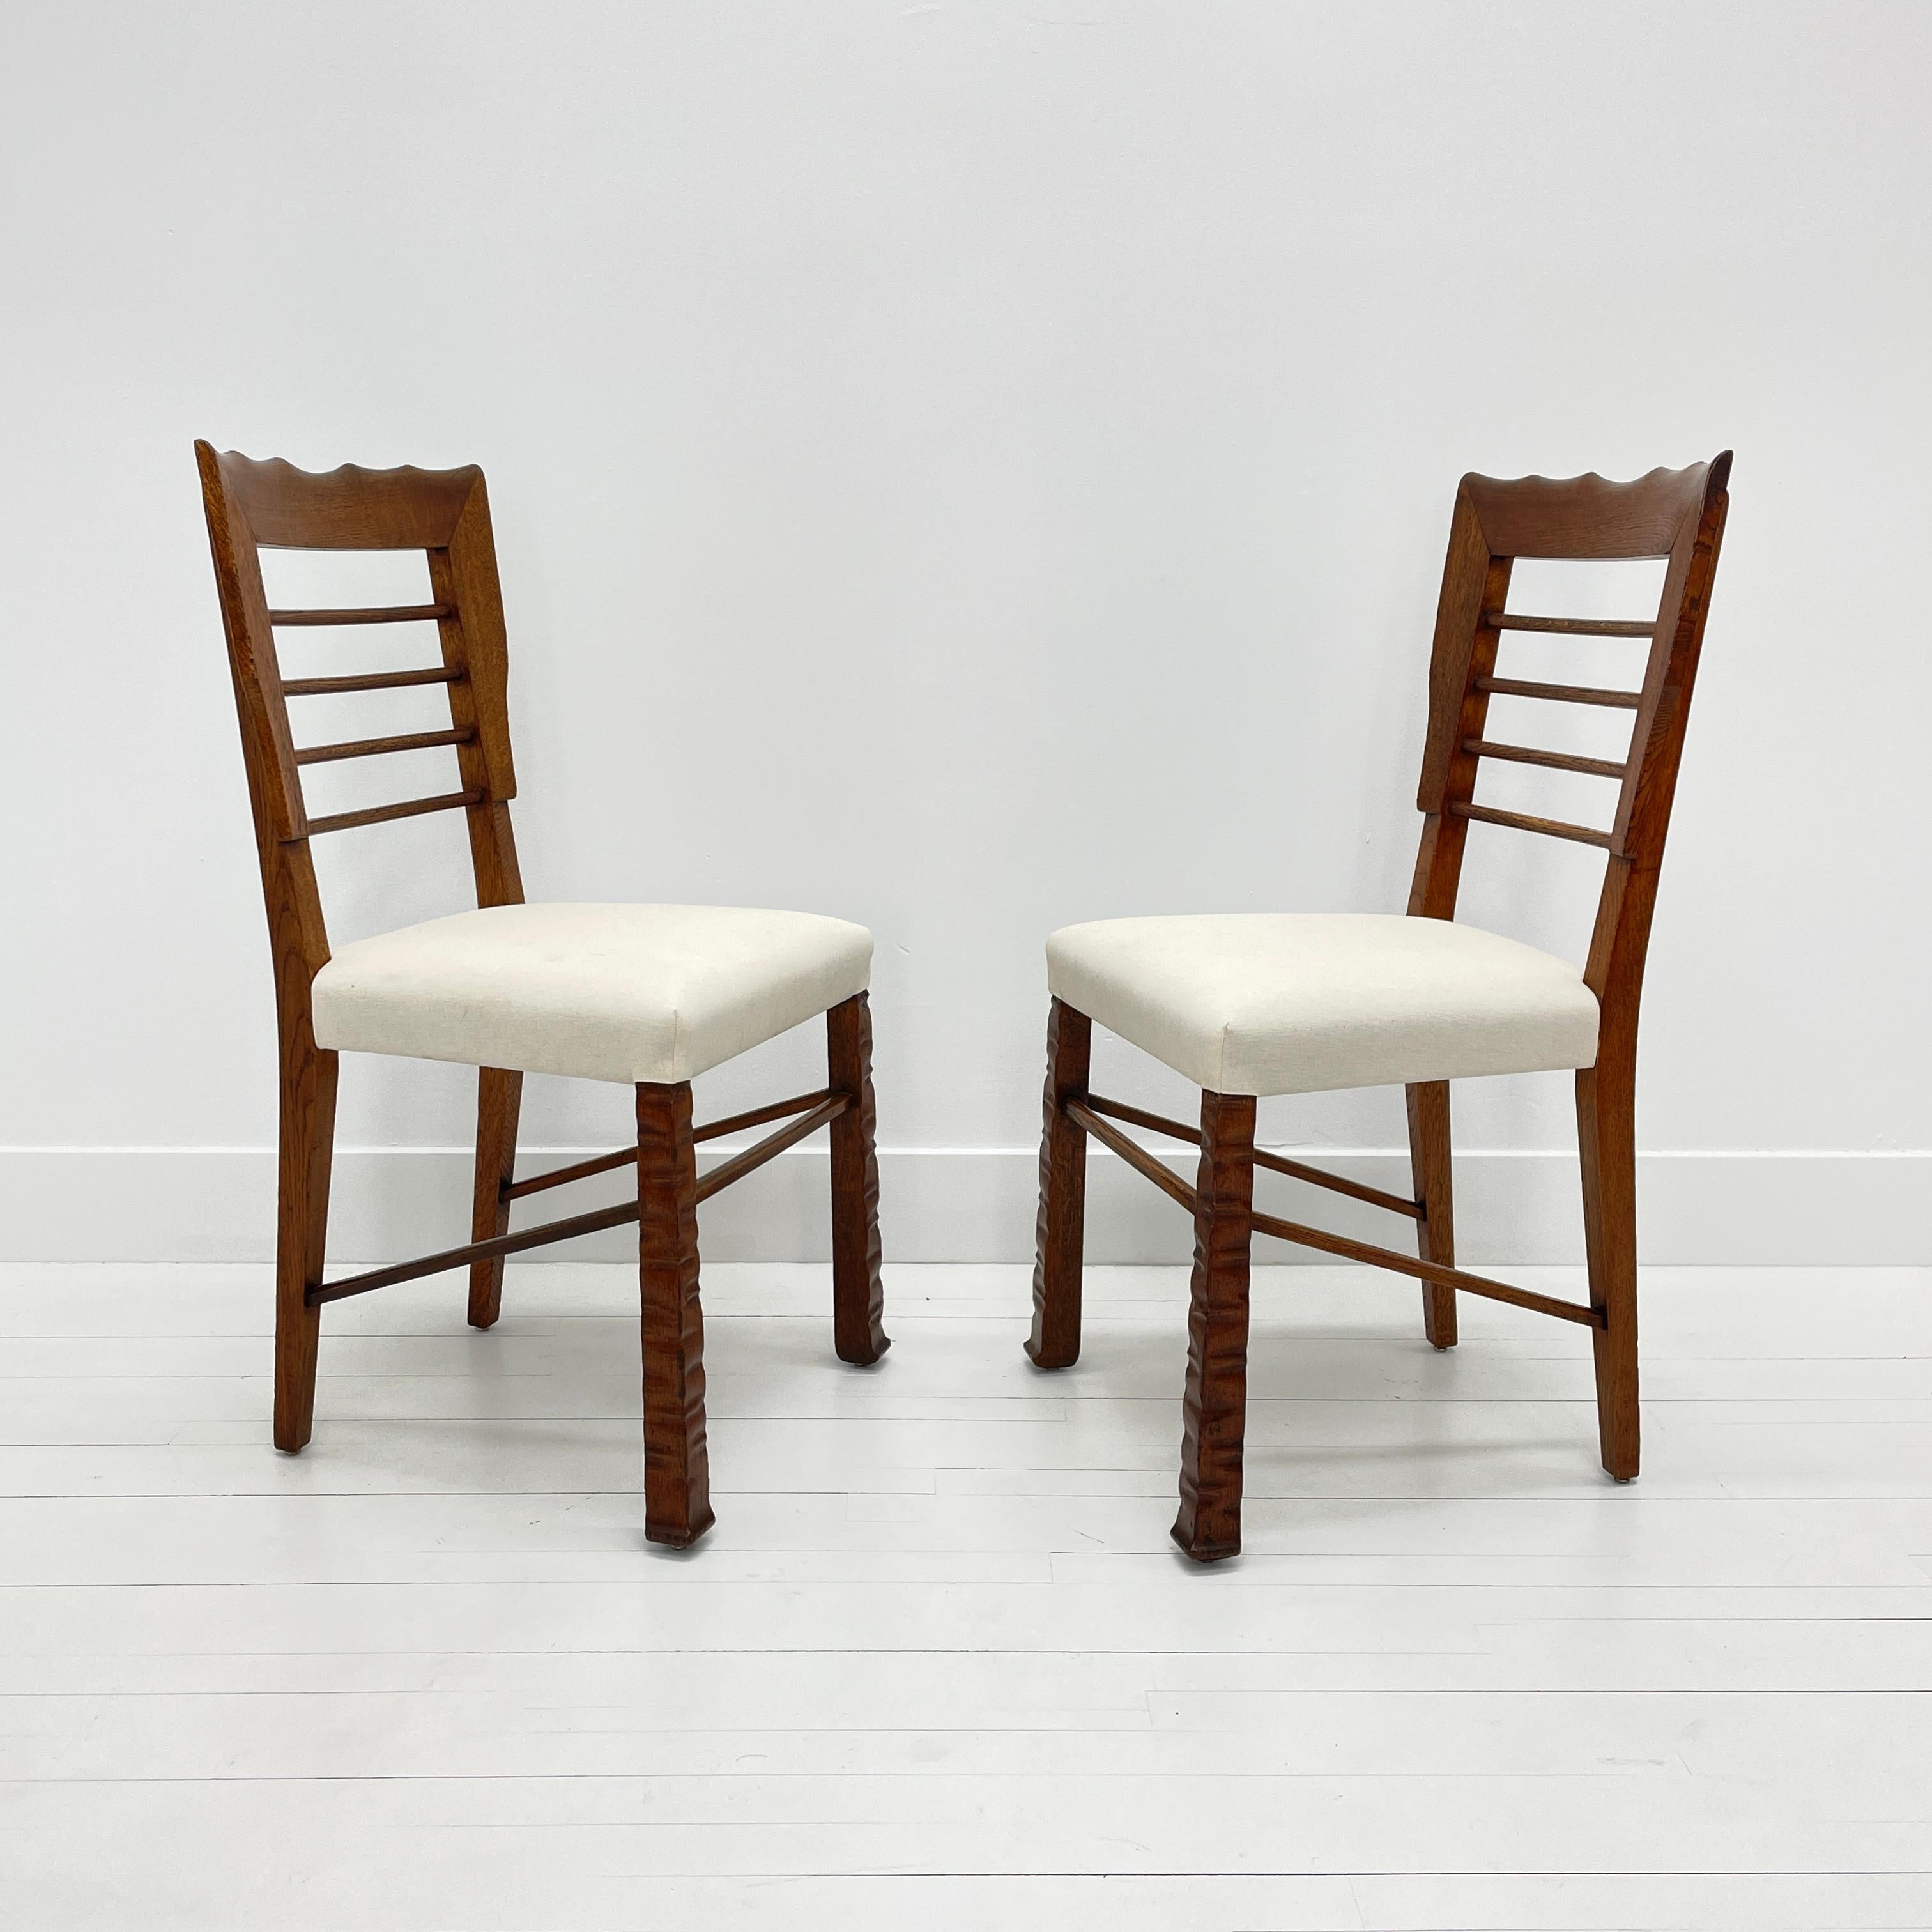 Rustic Scalloped Edge Dining Chairs, Set of 10, Italy, 1940's For Sale 8